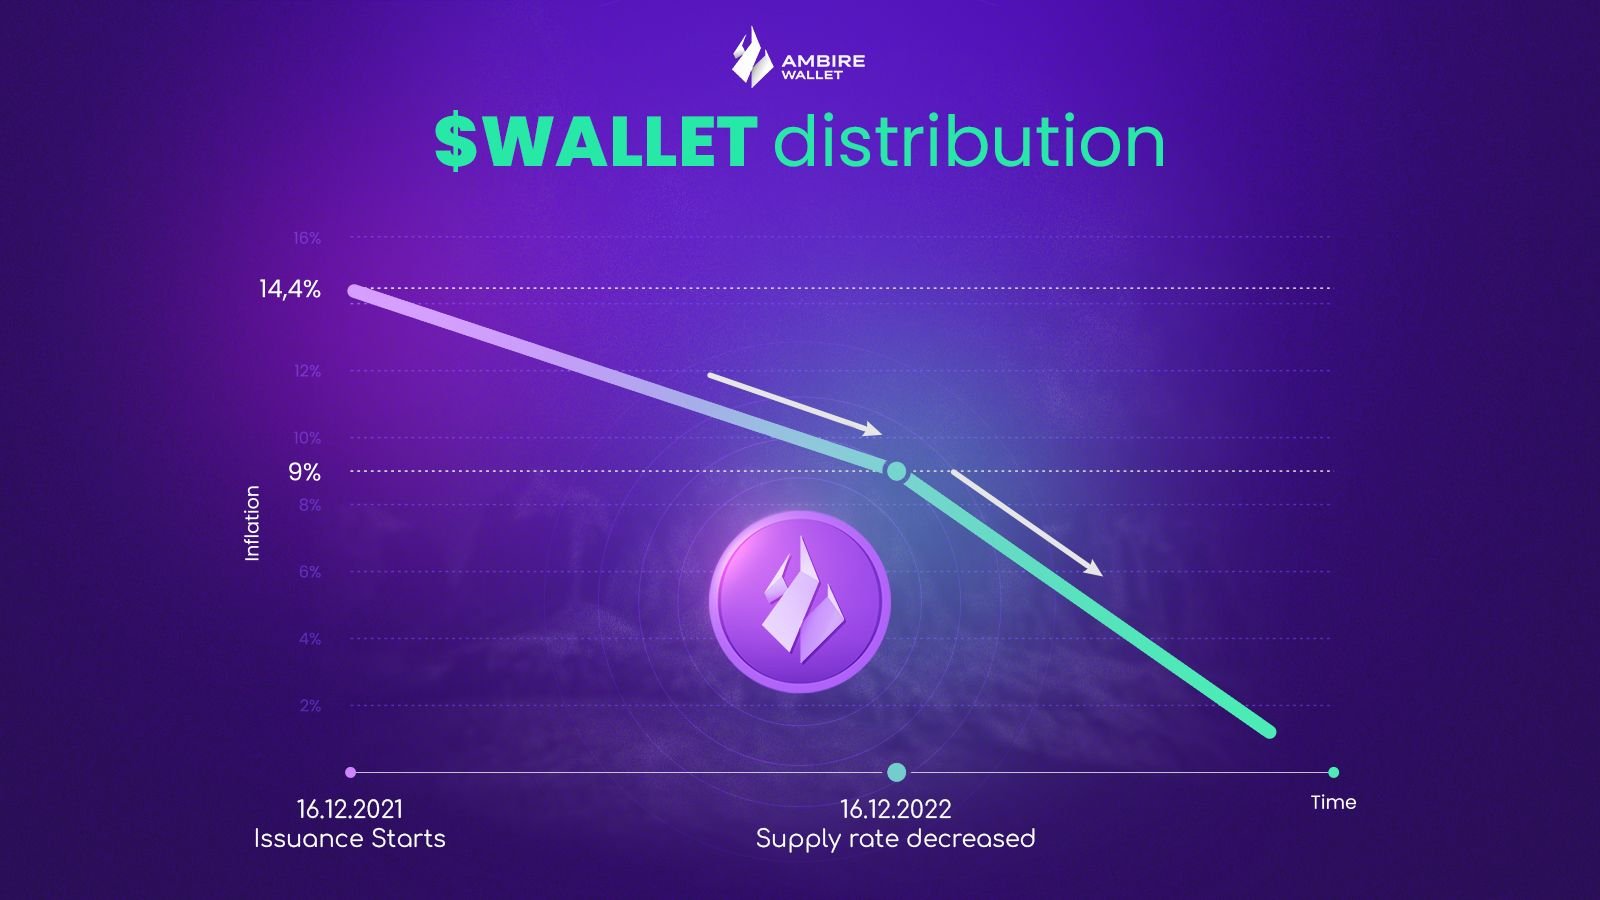 A graph showing the WALLET token distribution